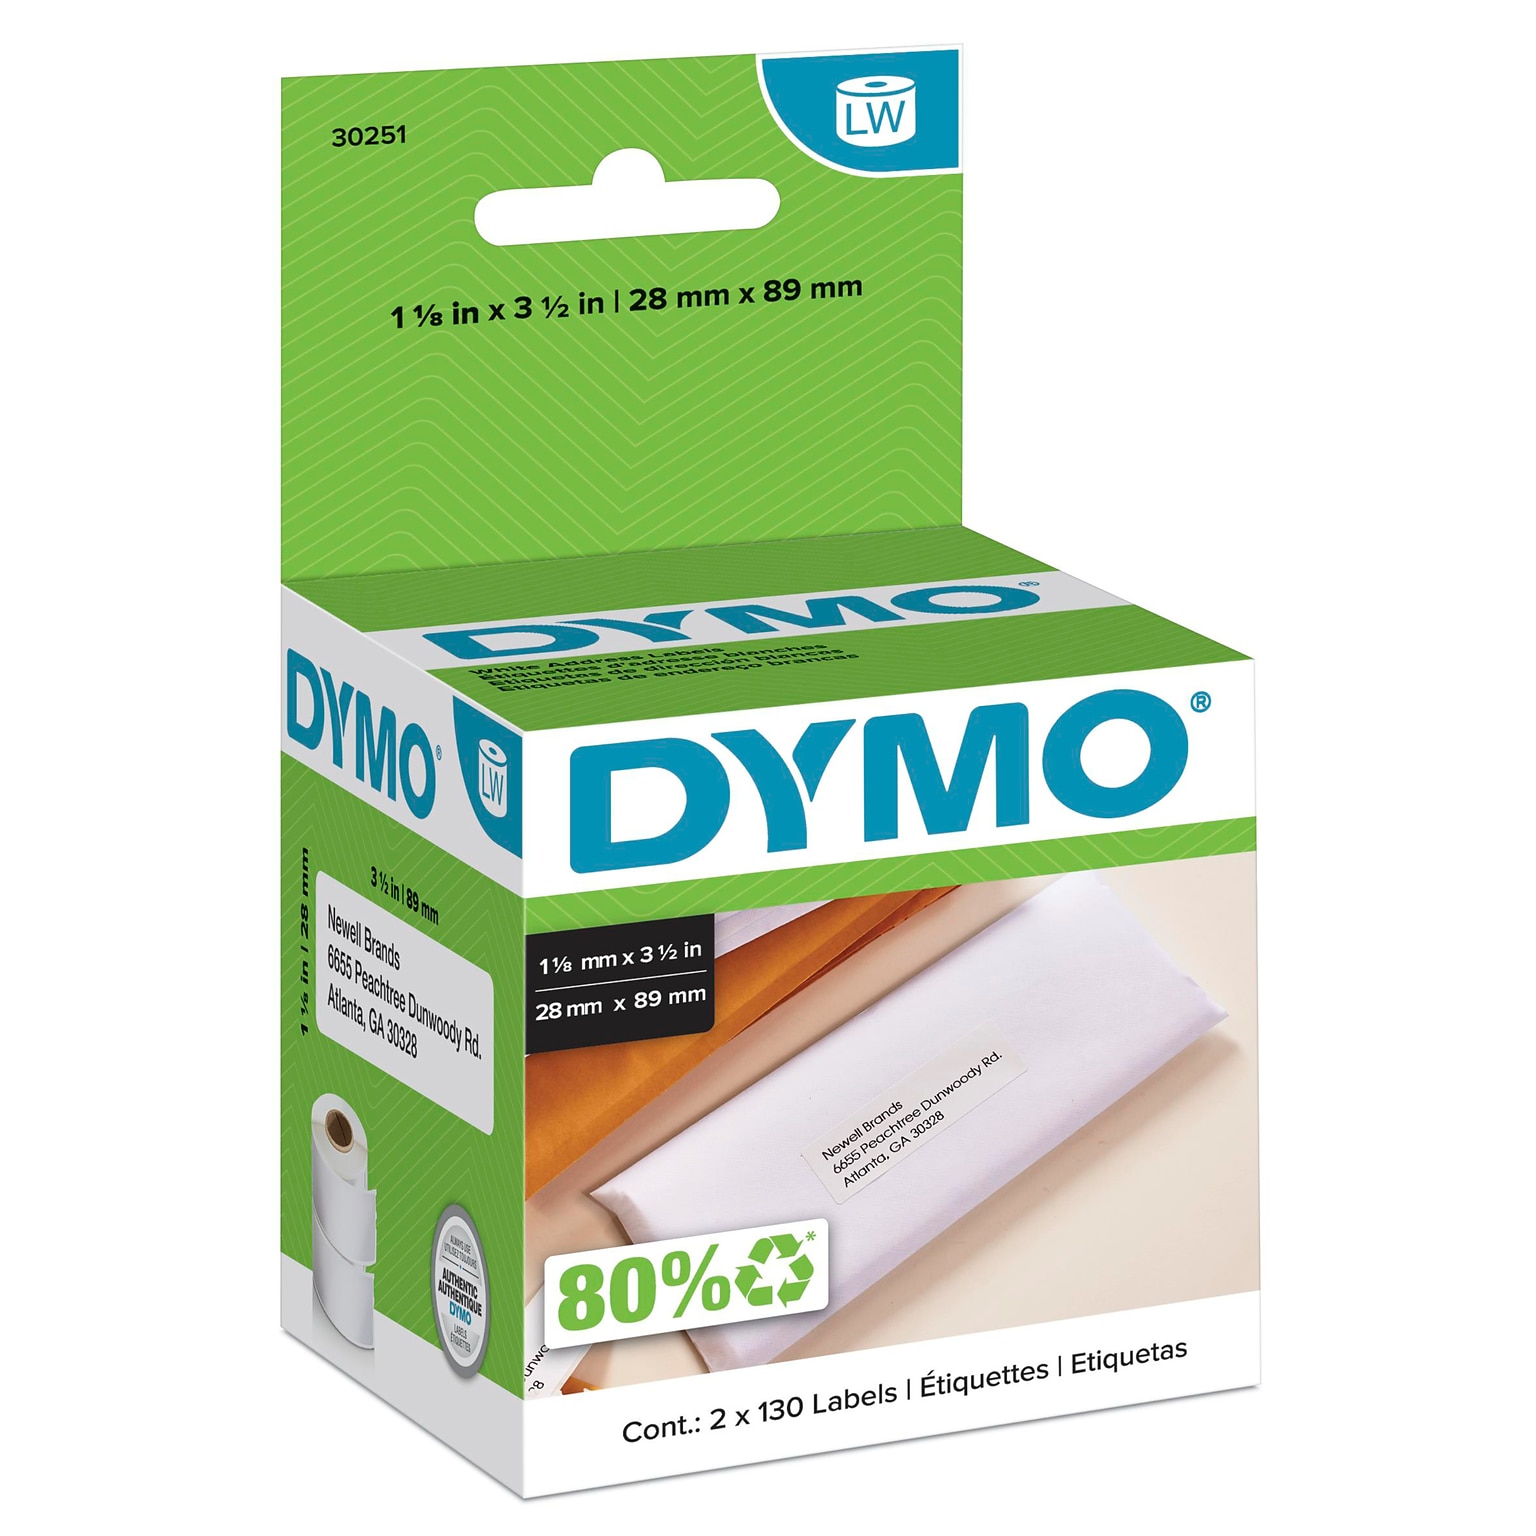 DYMO LabelWriter 30251 Mailing Address Labels, 3-1/2 x 1-1/8, Black on White, 130 Labels/Roll, 2 Rolls/Box (30251)